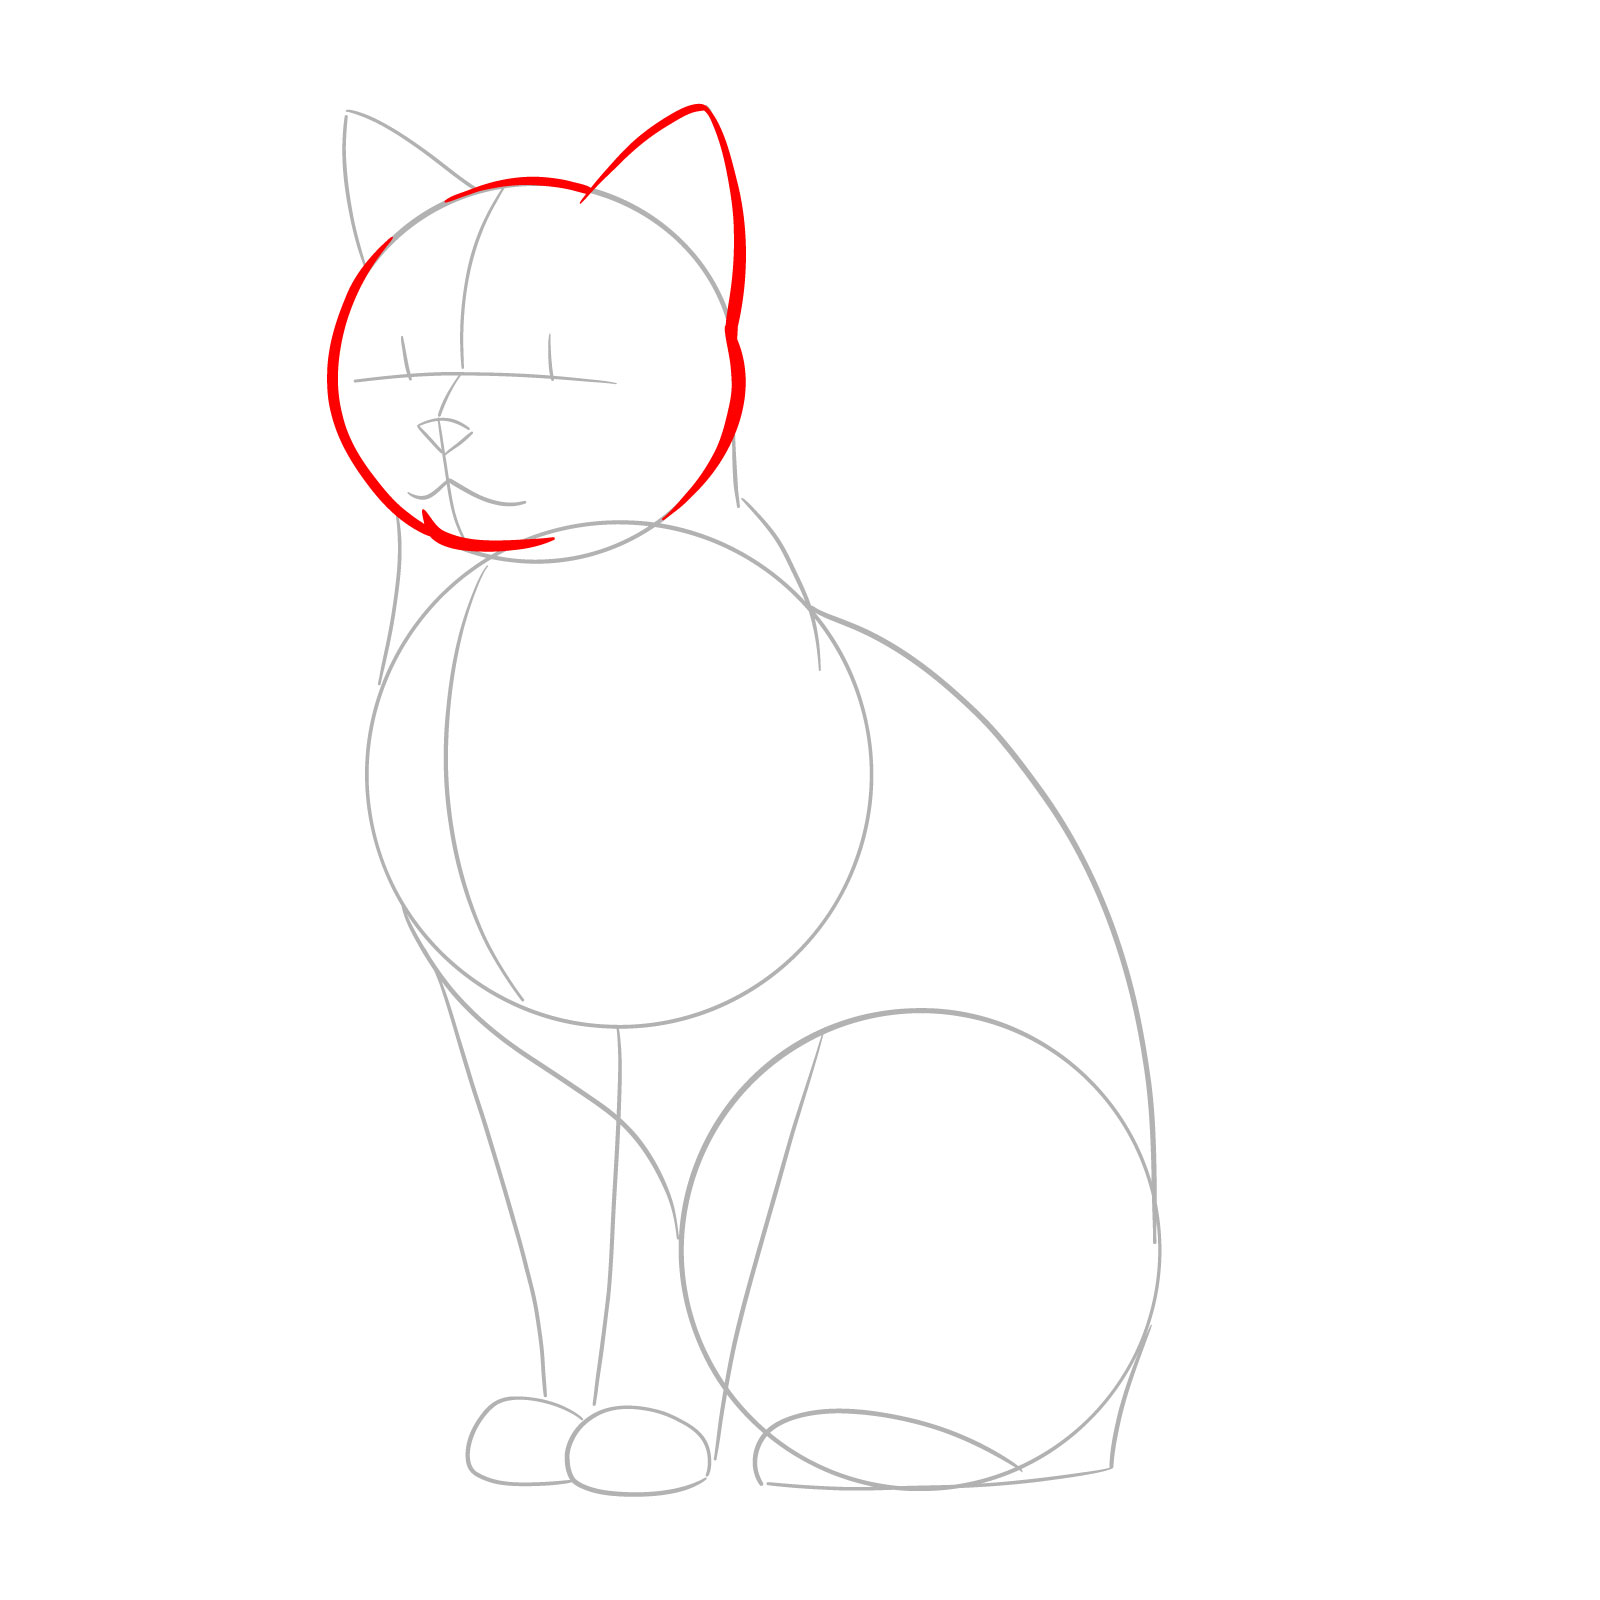 Outlining the head and ear of a cat from a side view - step 03